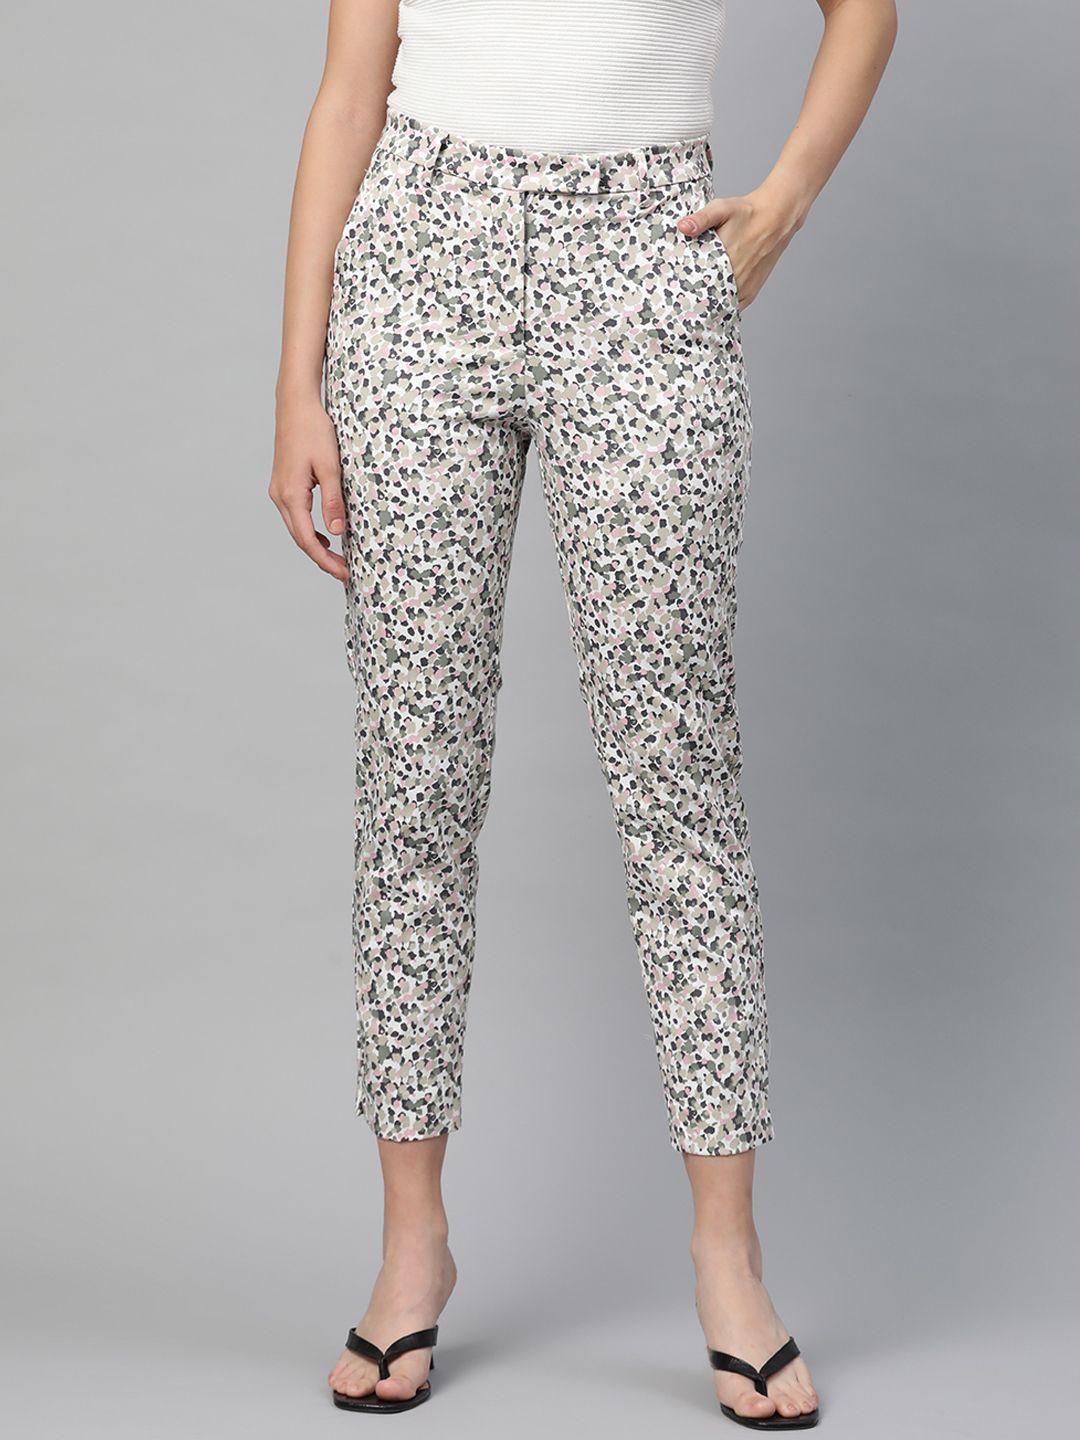 marks & spencer women white & olive green printed slim fit cropped trousers